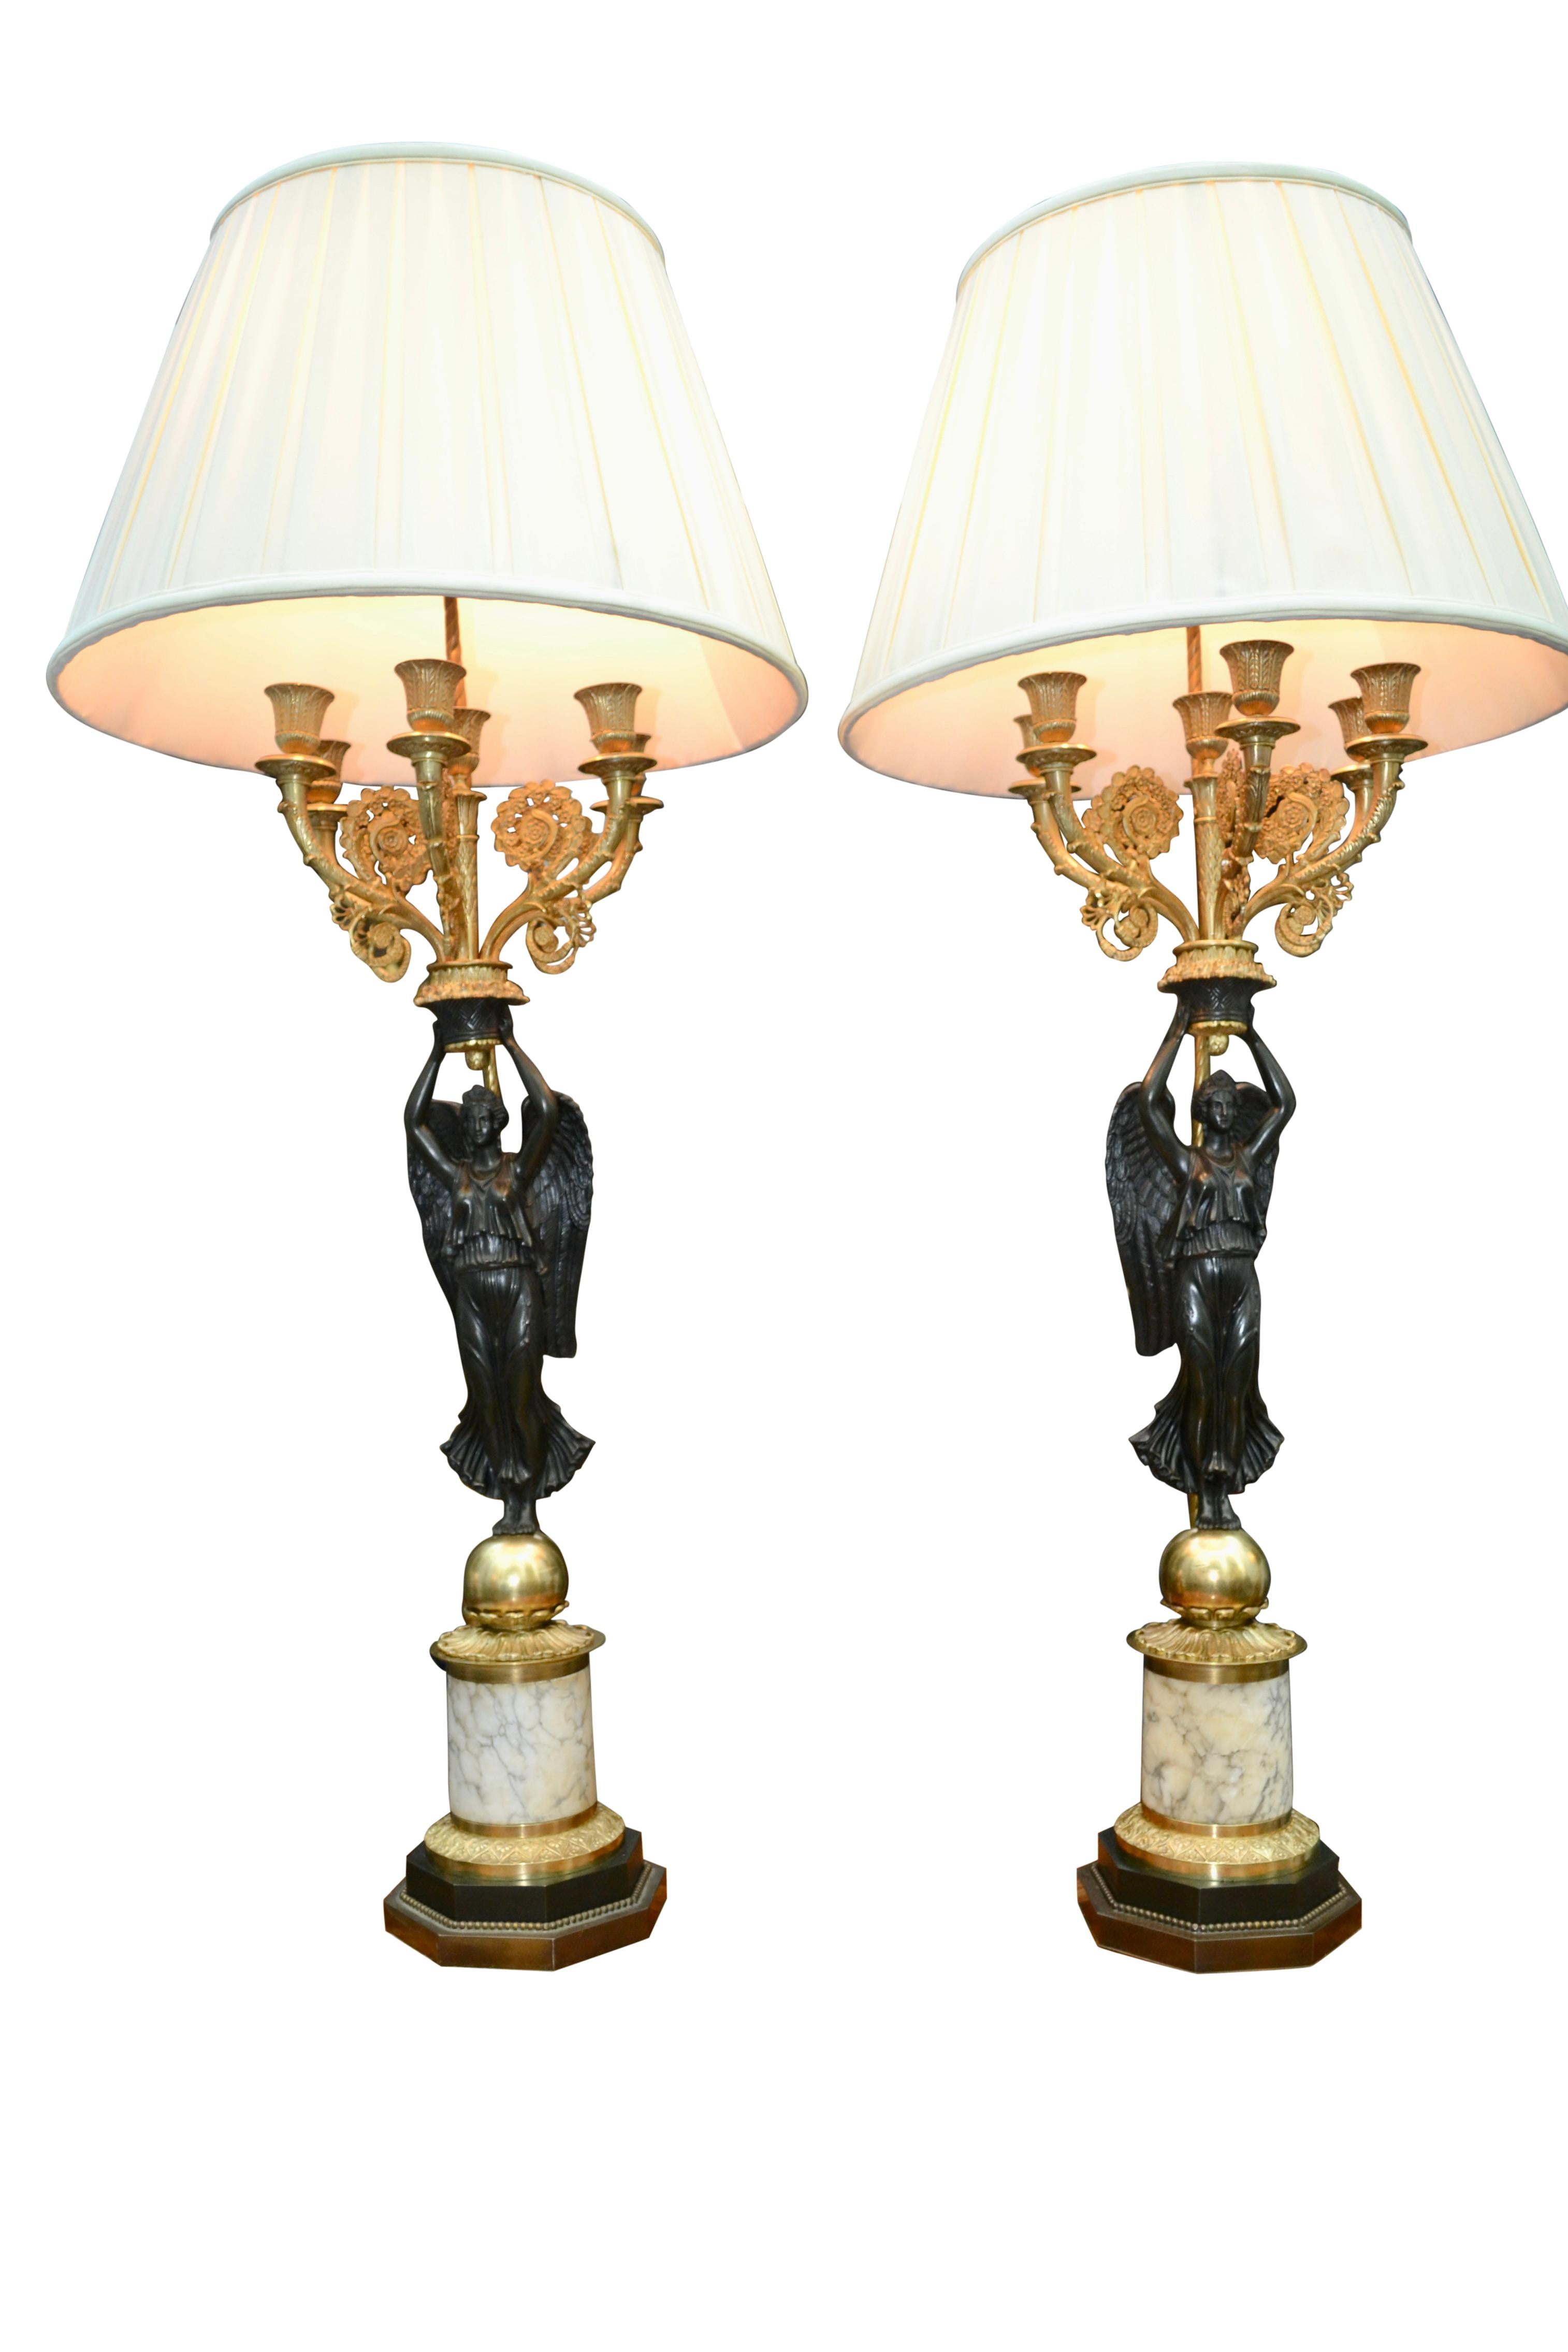 A Pair of French Empire Style Patinated and Gilt Bronze Winged Victory Lamps For Sale 1